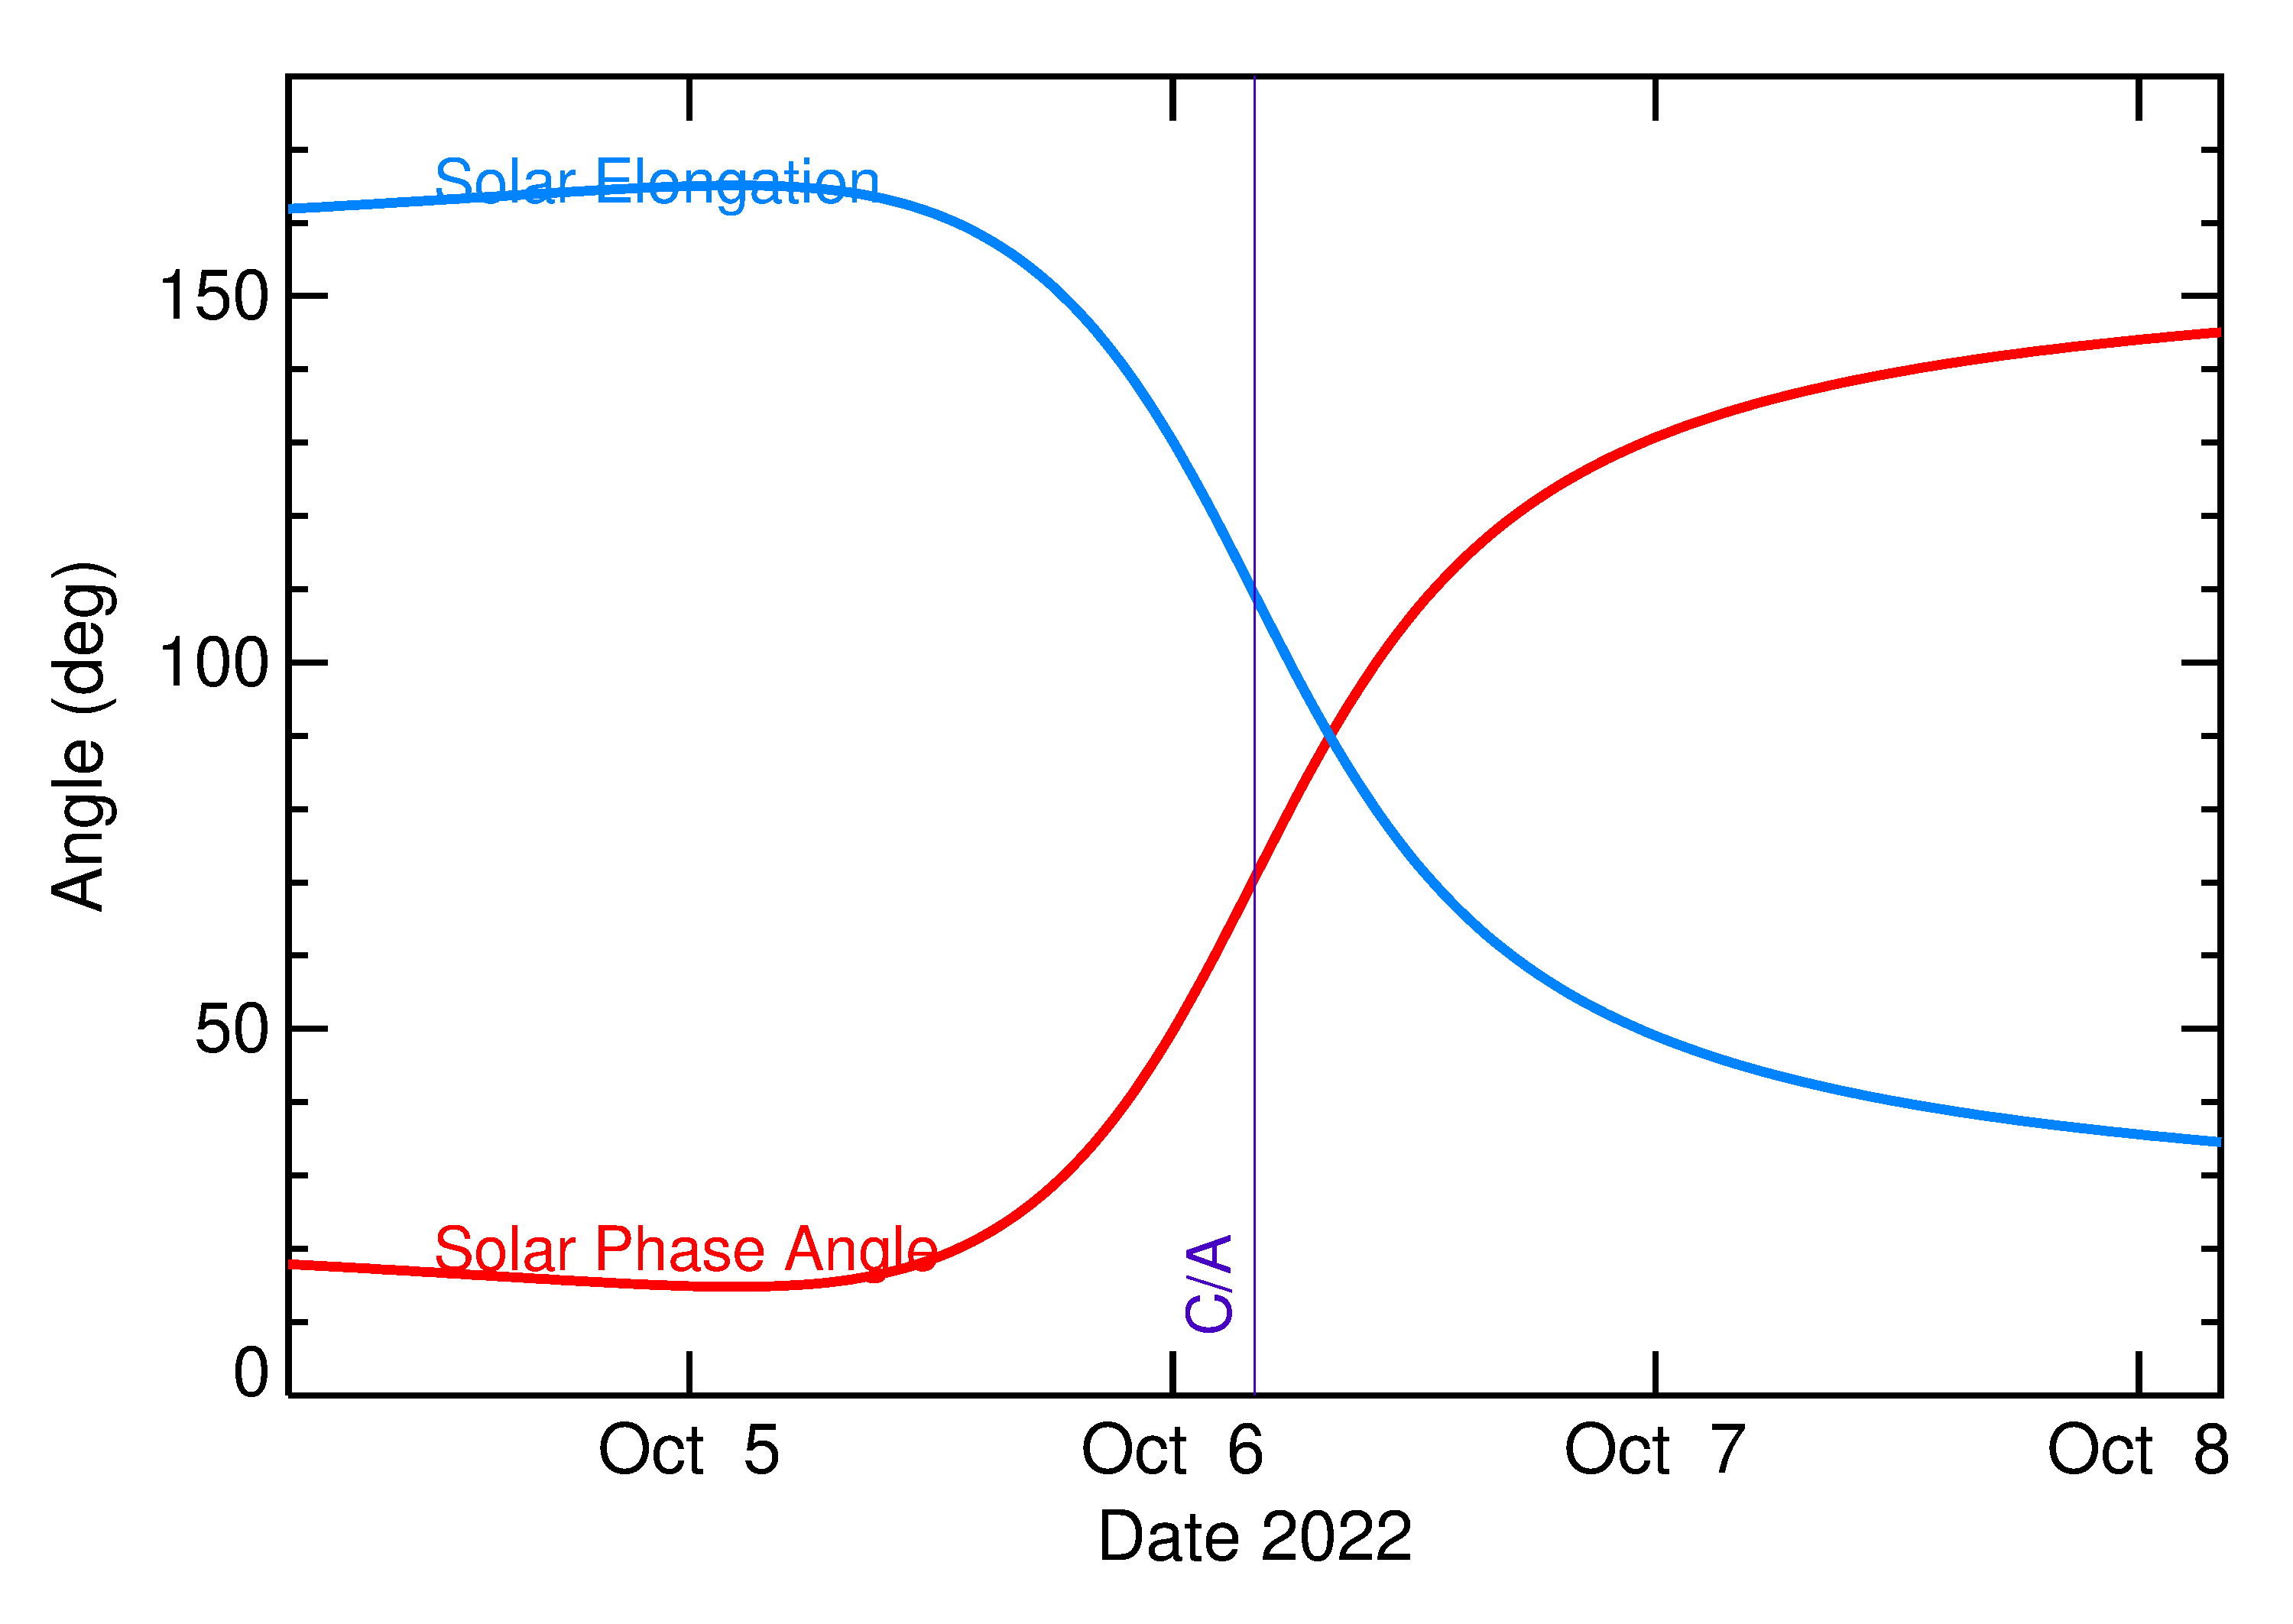 Solar Elongation and Solar Phase Angle of 2022 TD in the days around closest approach